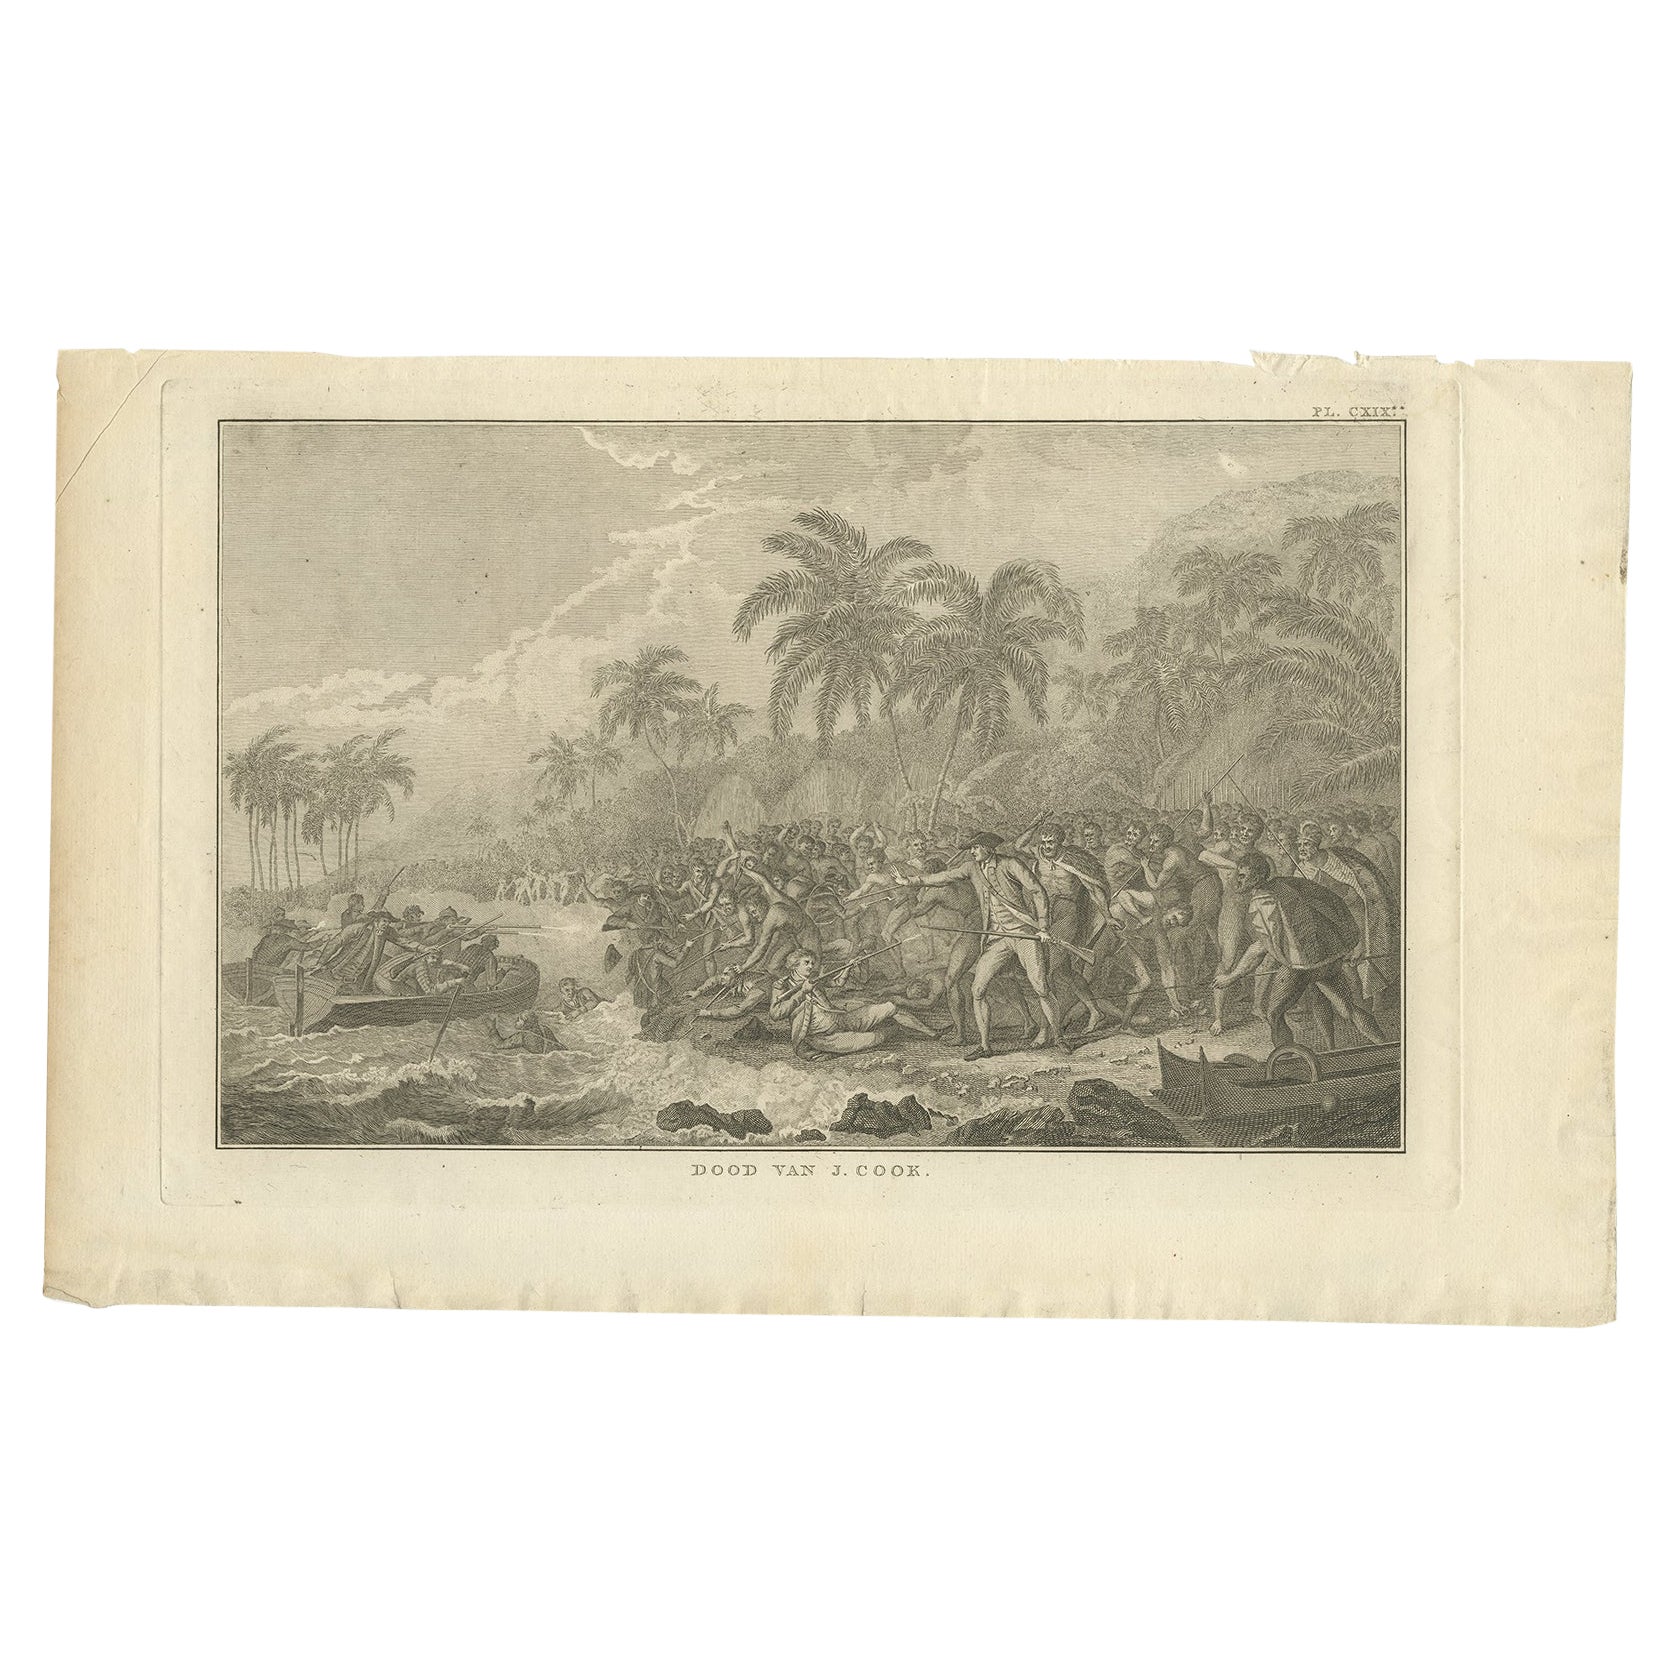 Antique Print of the Death of Captain James Cook by Cook, 1803